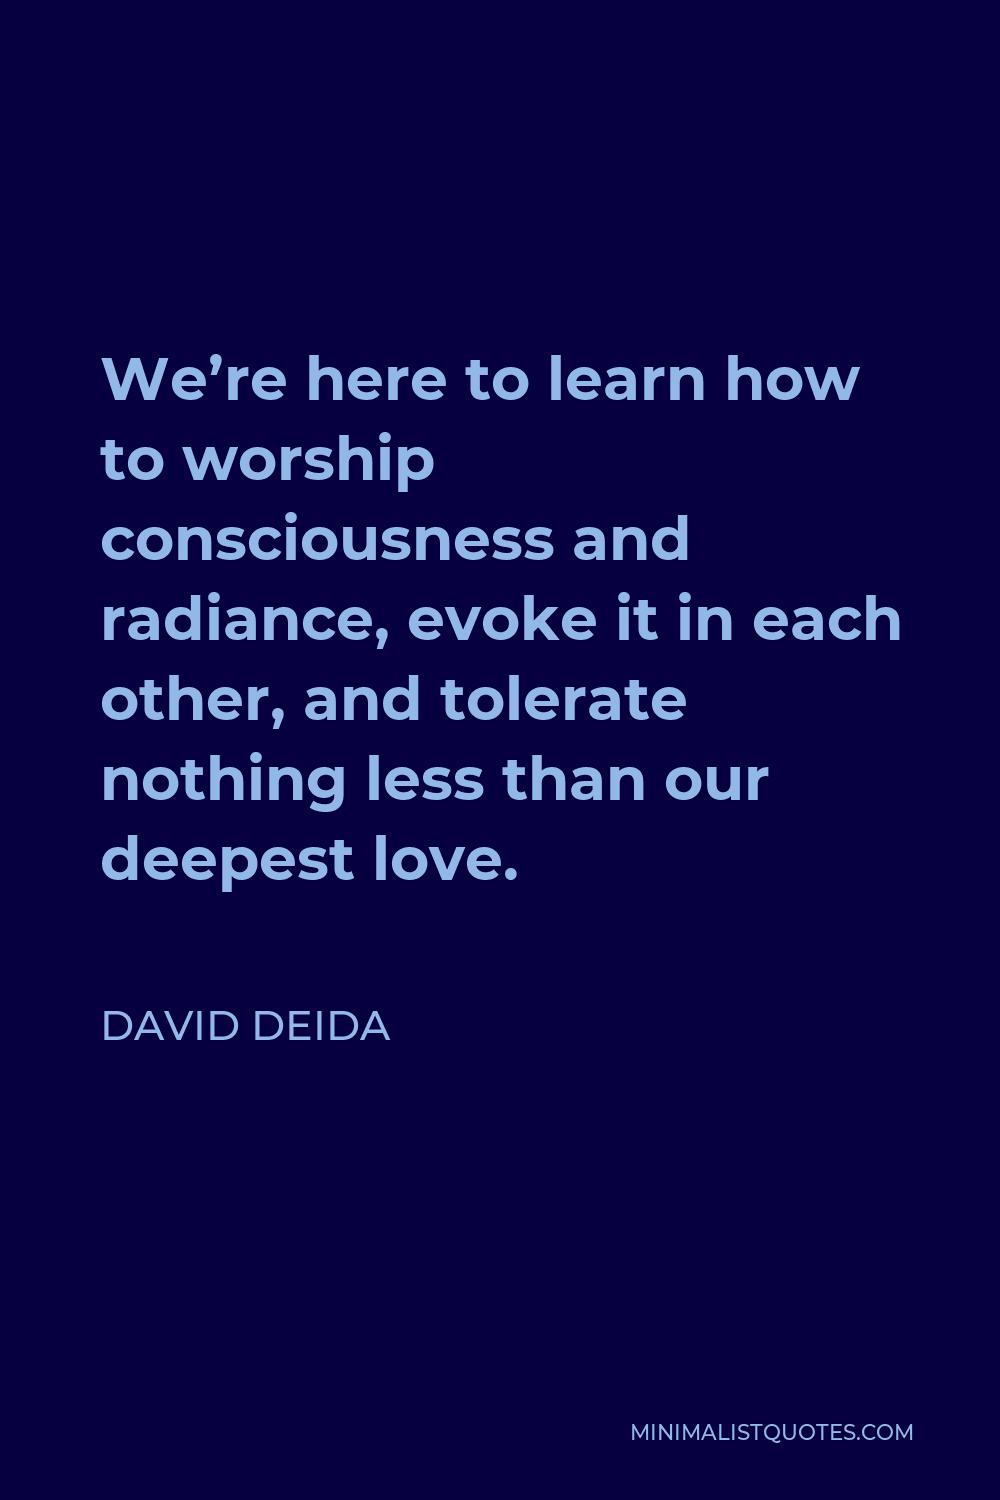 David Deida Quote - We’re here to learn how to worship consciousness and radiance, evoke it in each other, and tolerate nothing less than our deepest love.